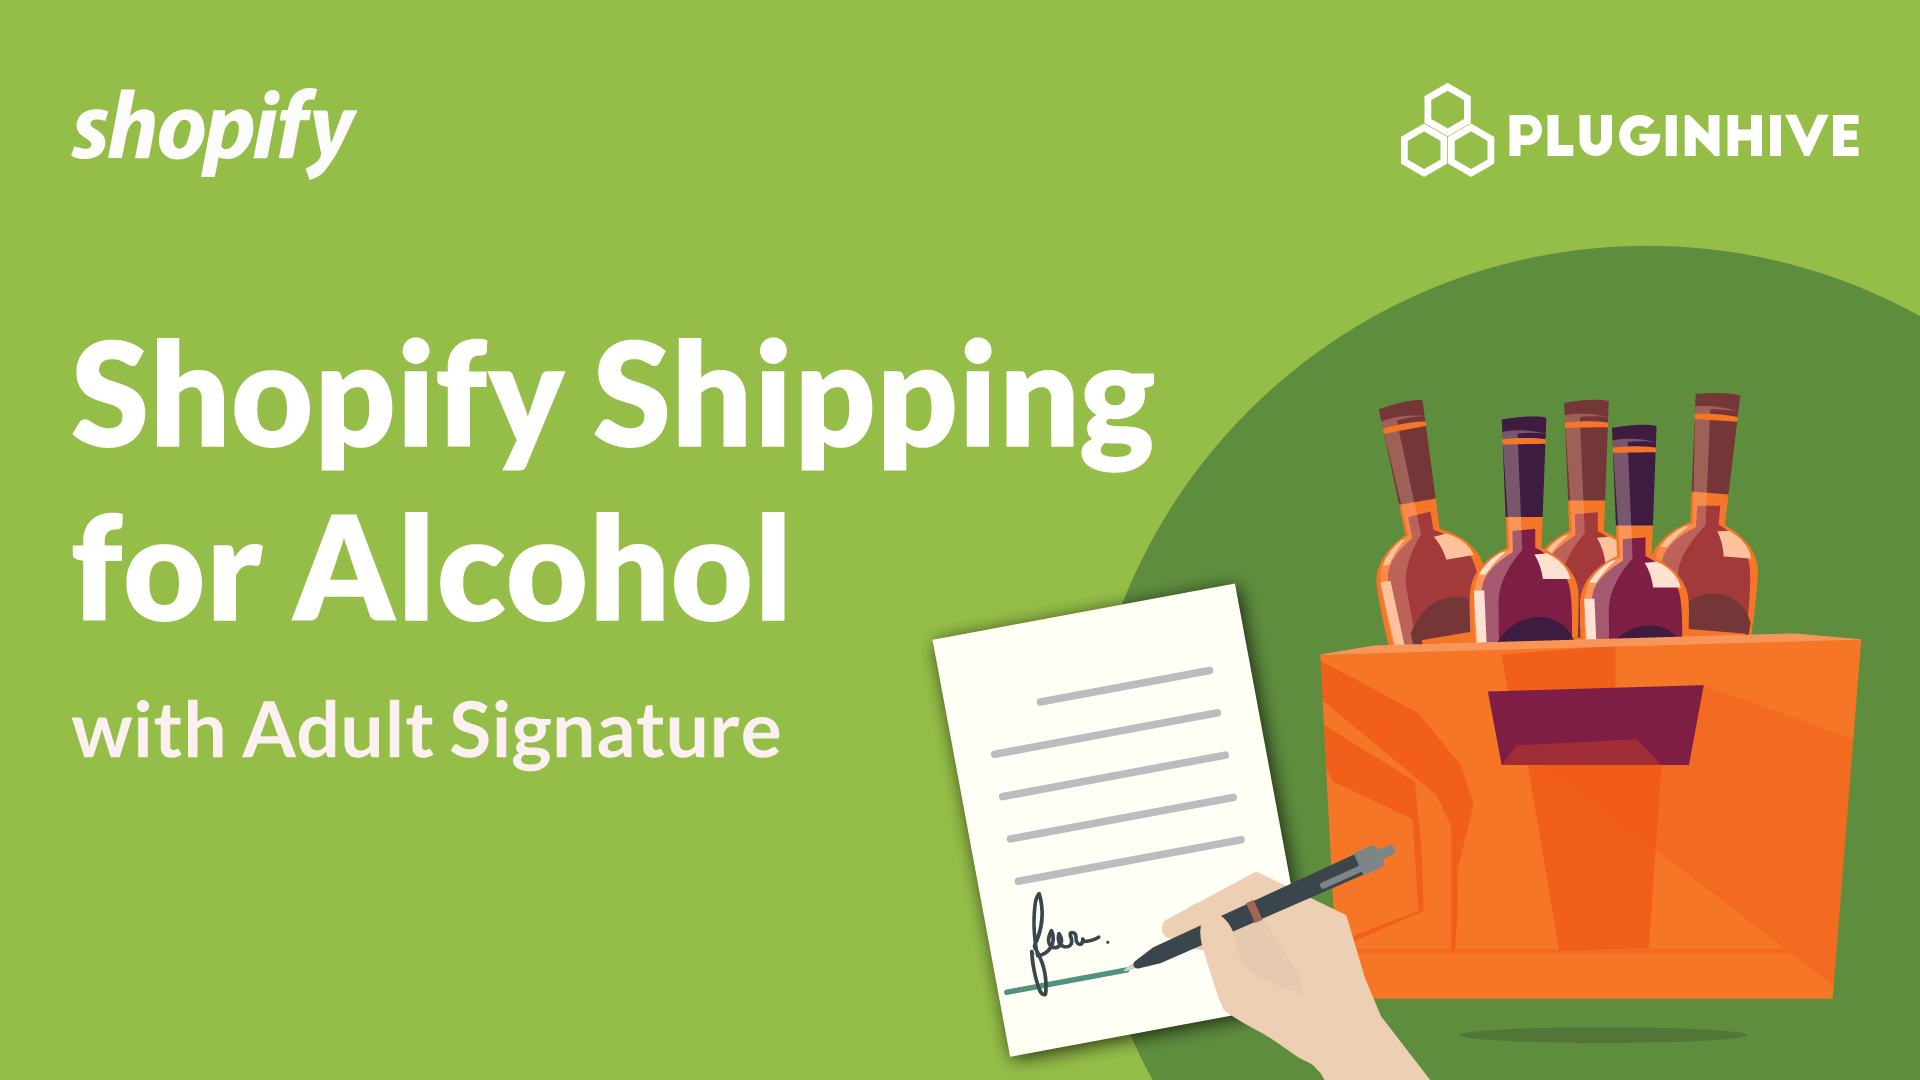 Shopify shipping for alcohol with adult signature